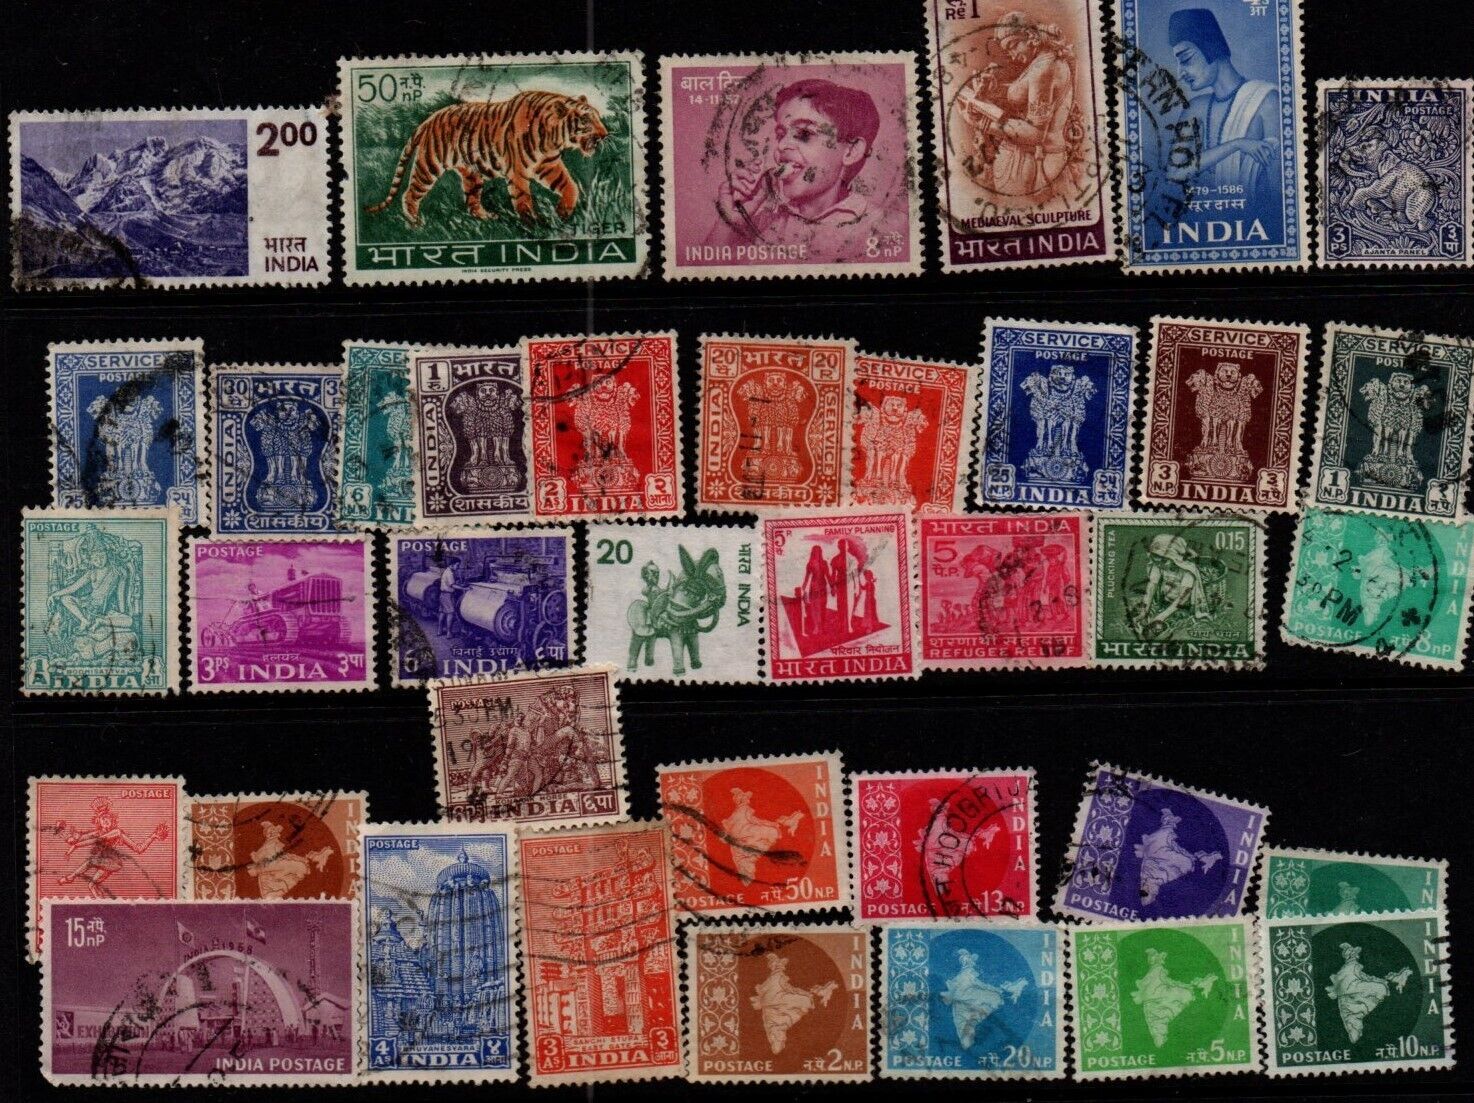 India stamps 1947 and after